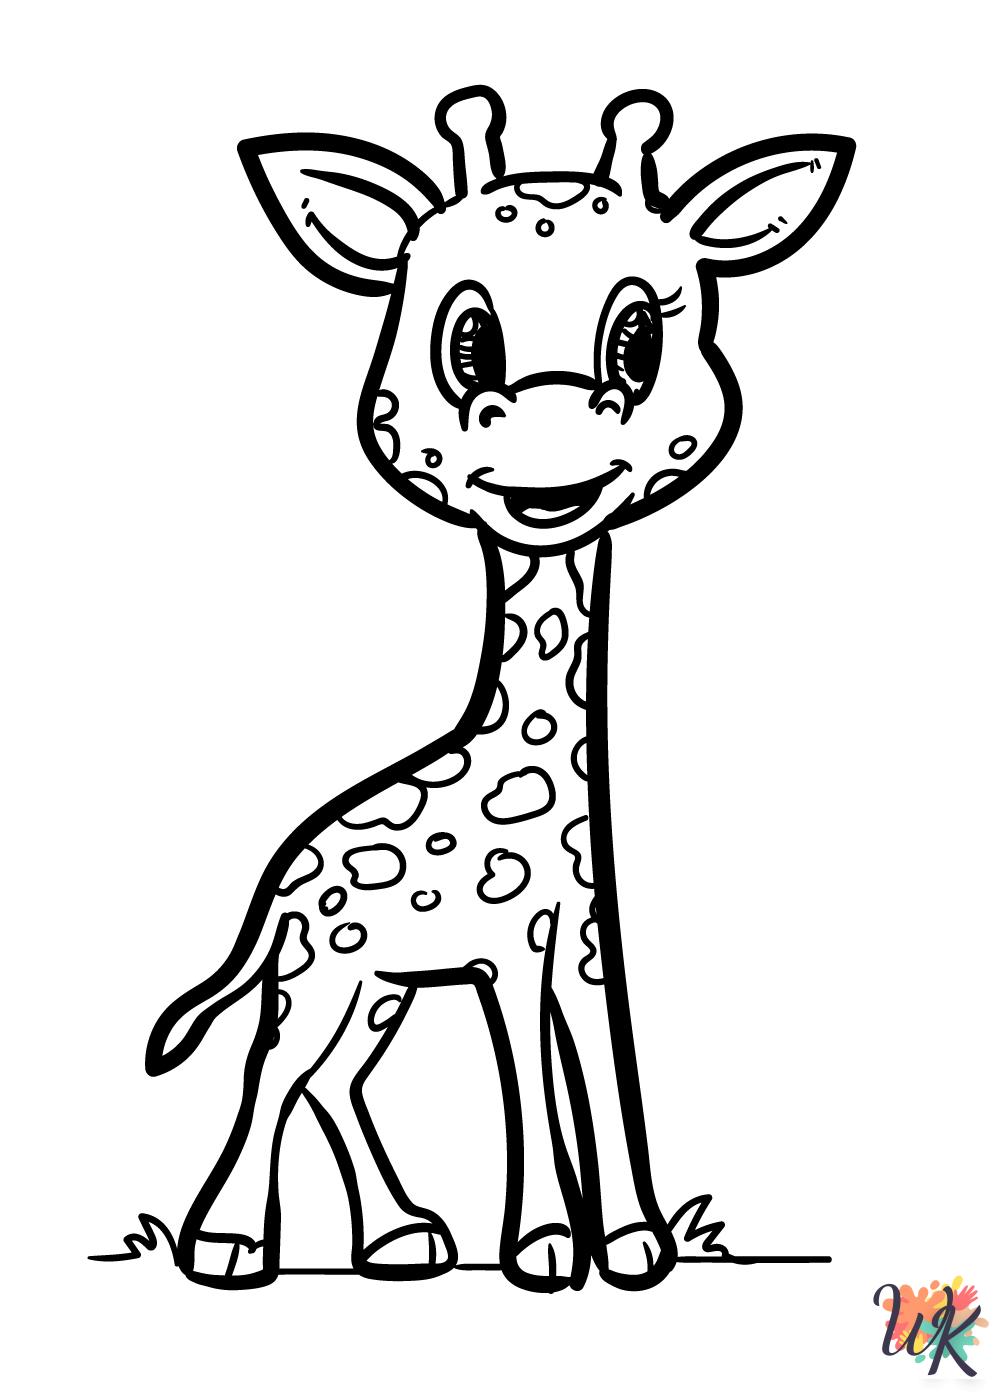 Giraffe cards coloring pages